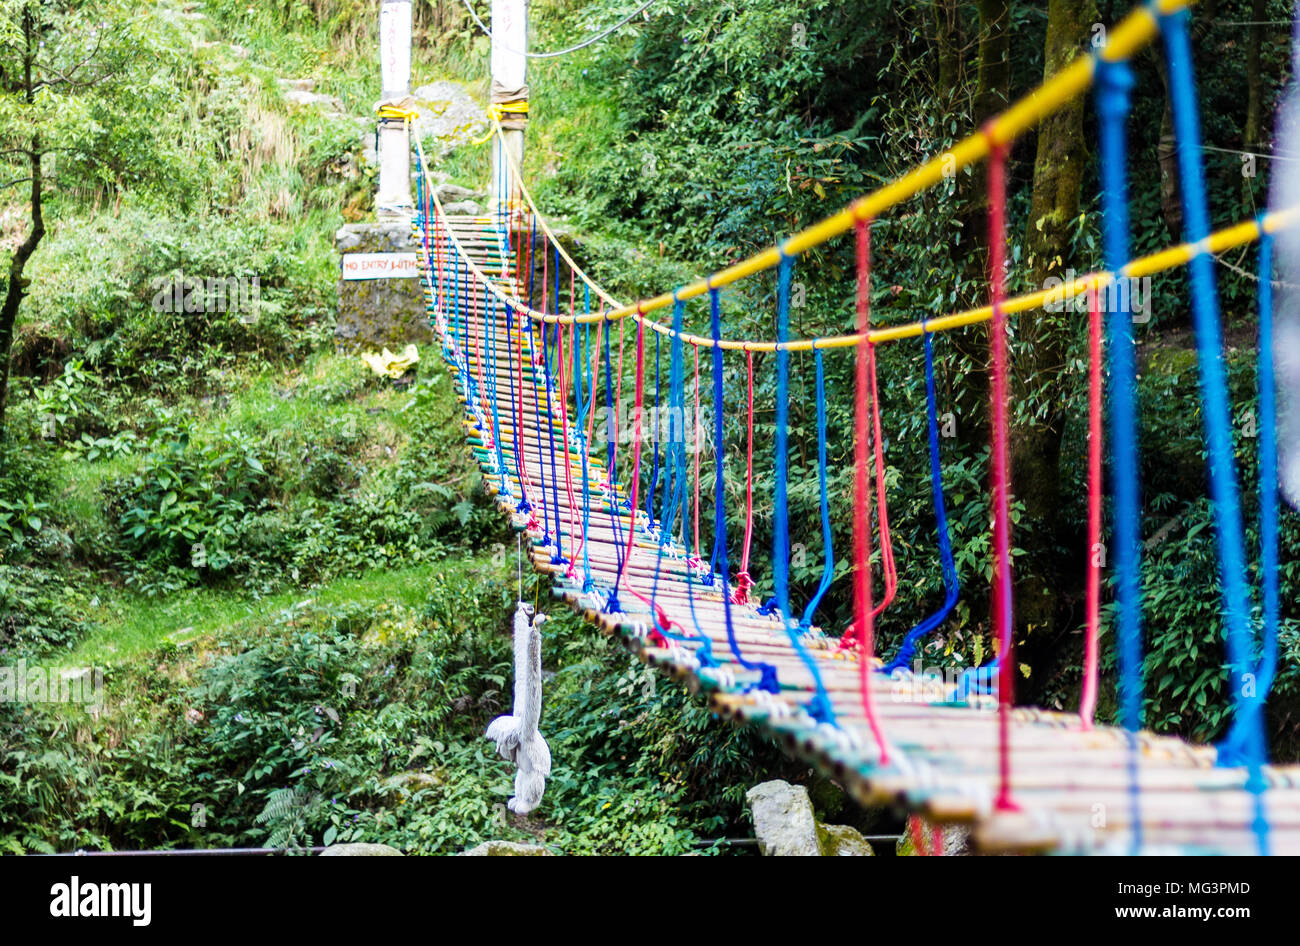 A hanging rope bridge over the waterfall in Panchpula Dalhousie, Himachal Pradesh, India. Used for adventure activities for kids and teenagers - Image Stock Photo